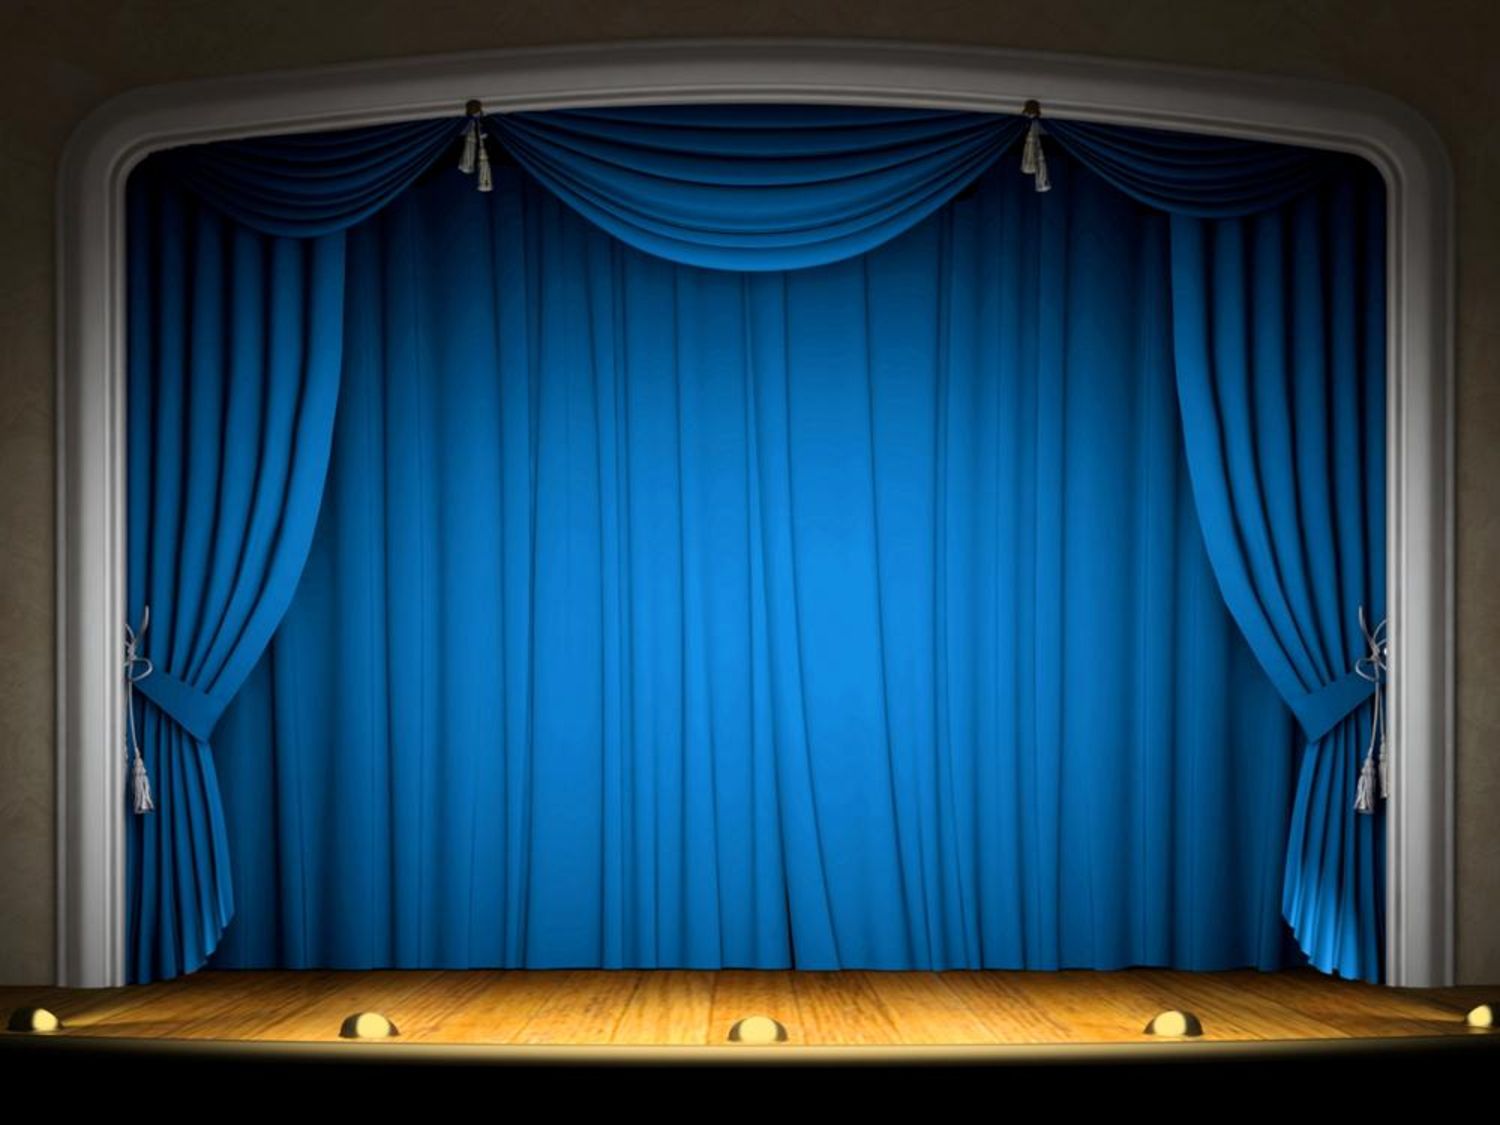 Download Drama clipart stage background, Drama stage background ...